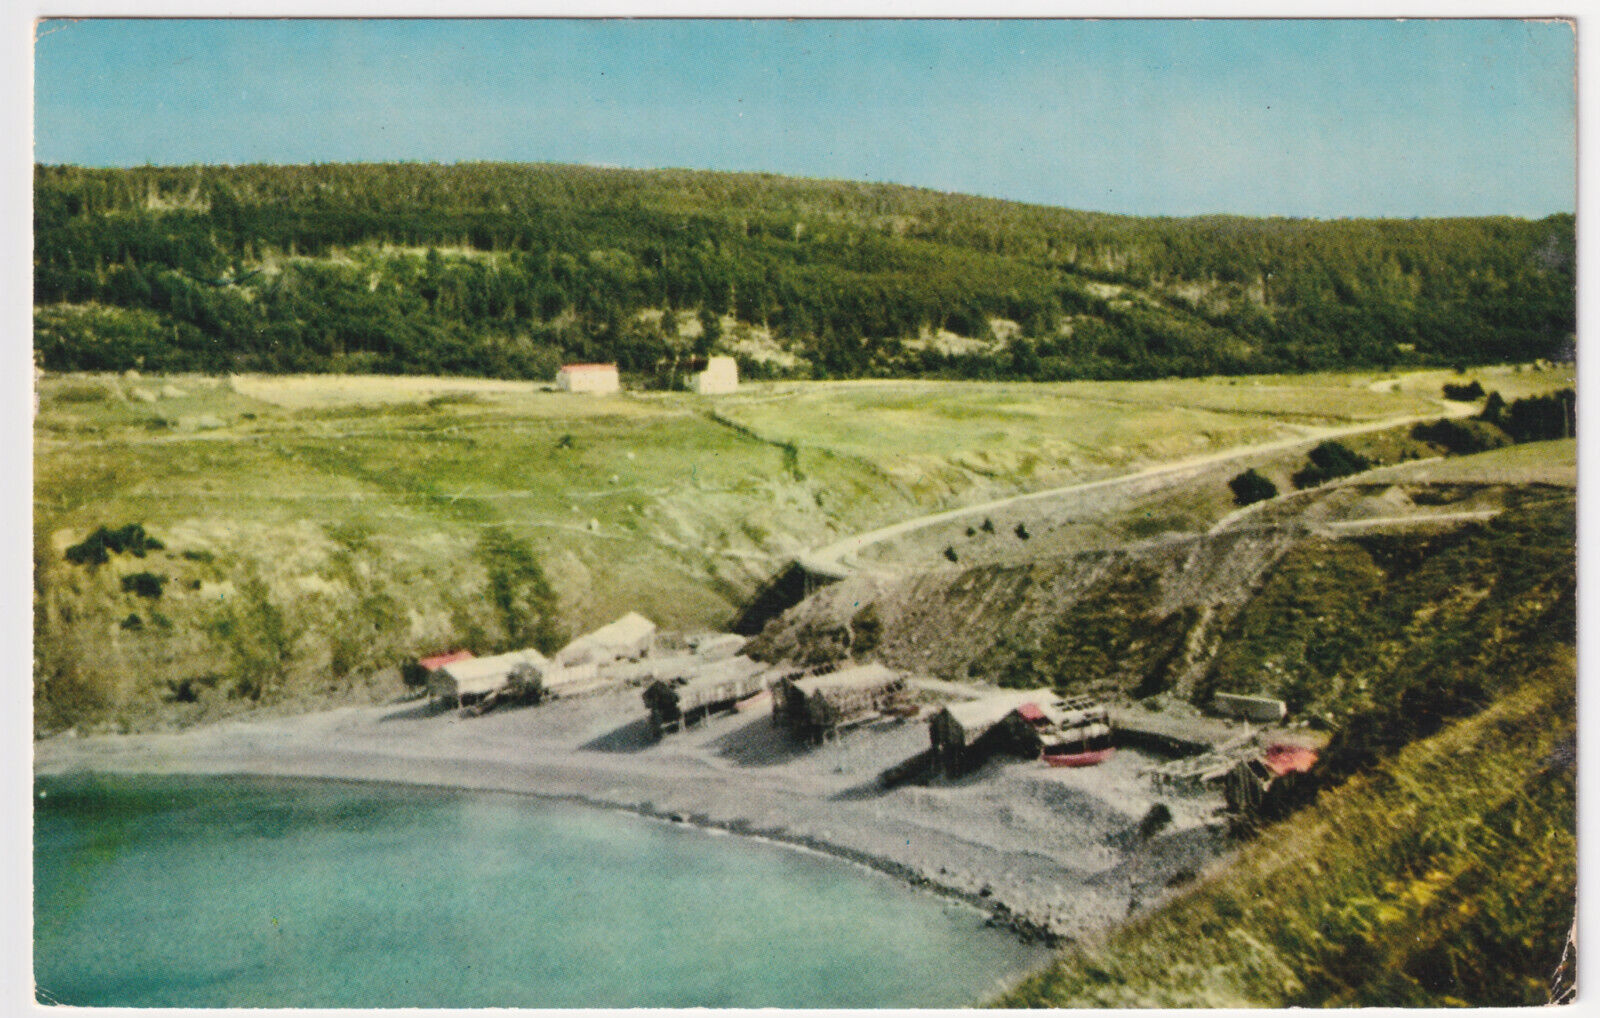 NEWFOUNDLAND LOGY BAY ON THE MARINE DRIVE POSTED 1960 TO MRS KABIN, OAKVILLE ON